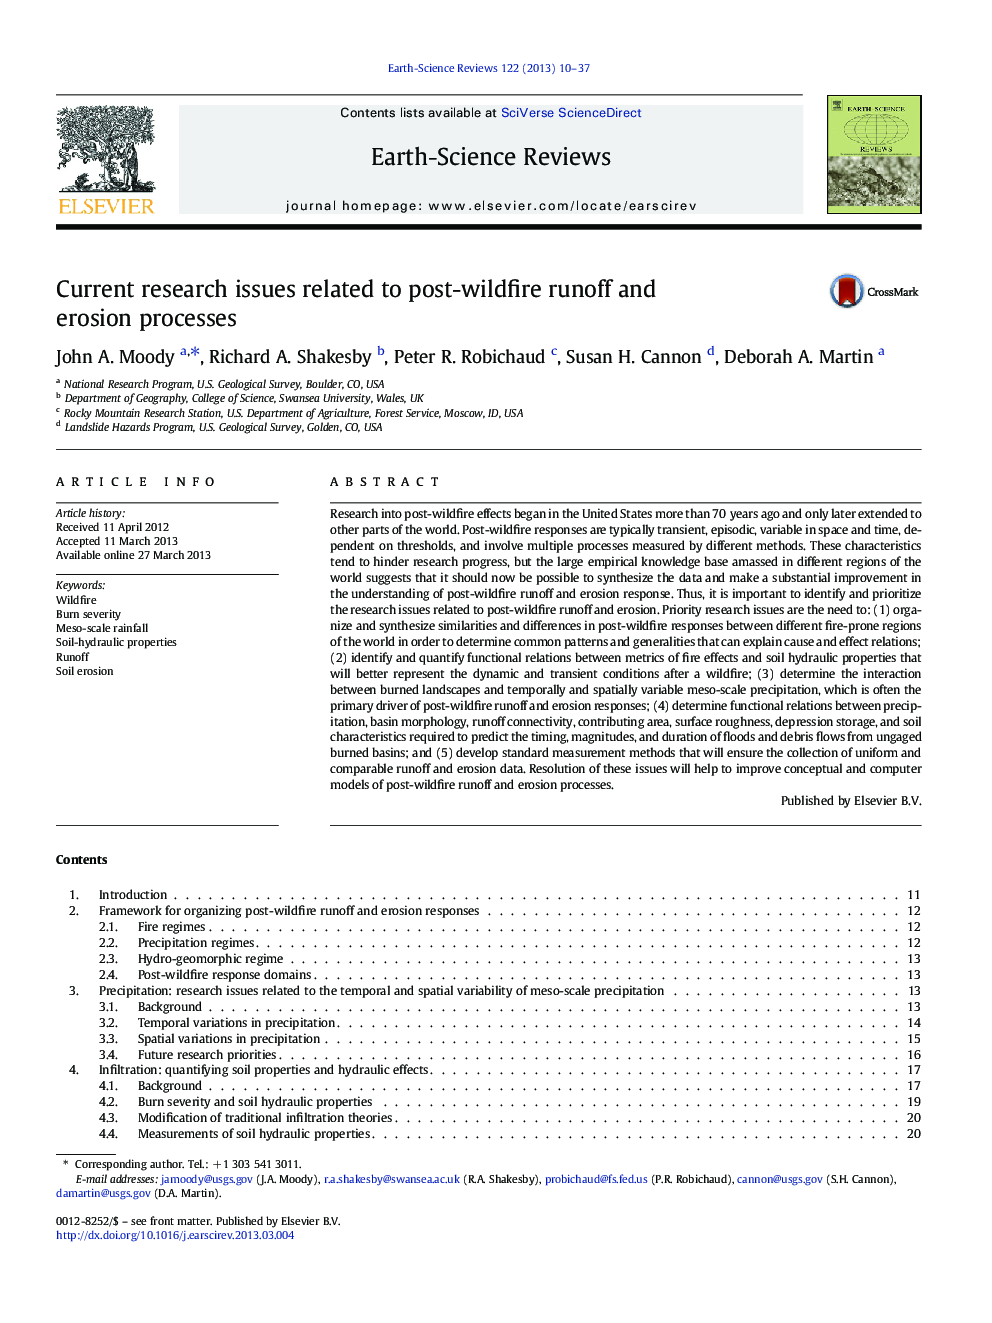 Current research issues related to post-wildfire runoff and erosion processes